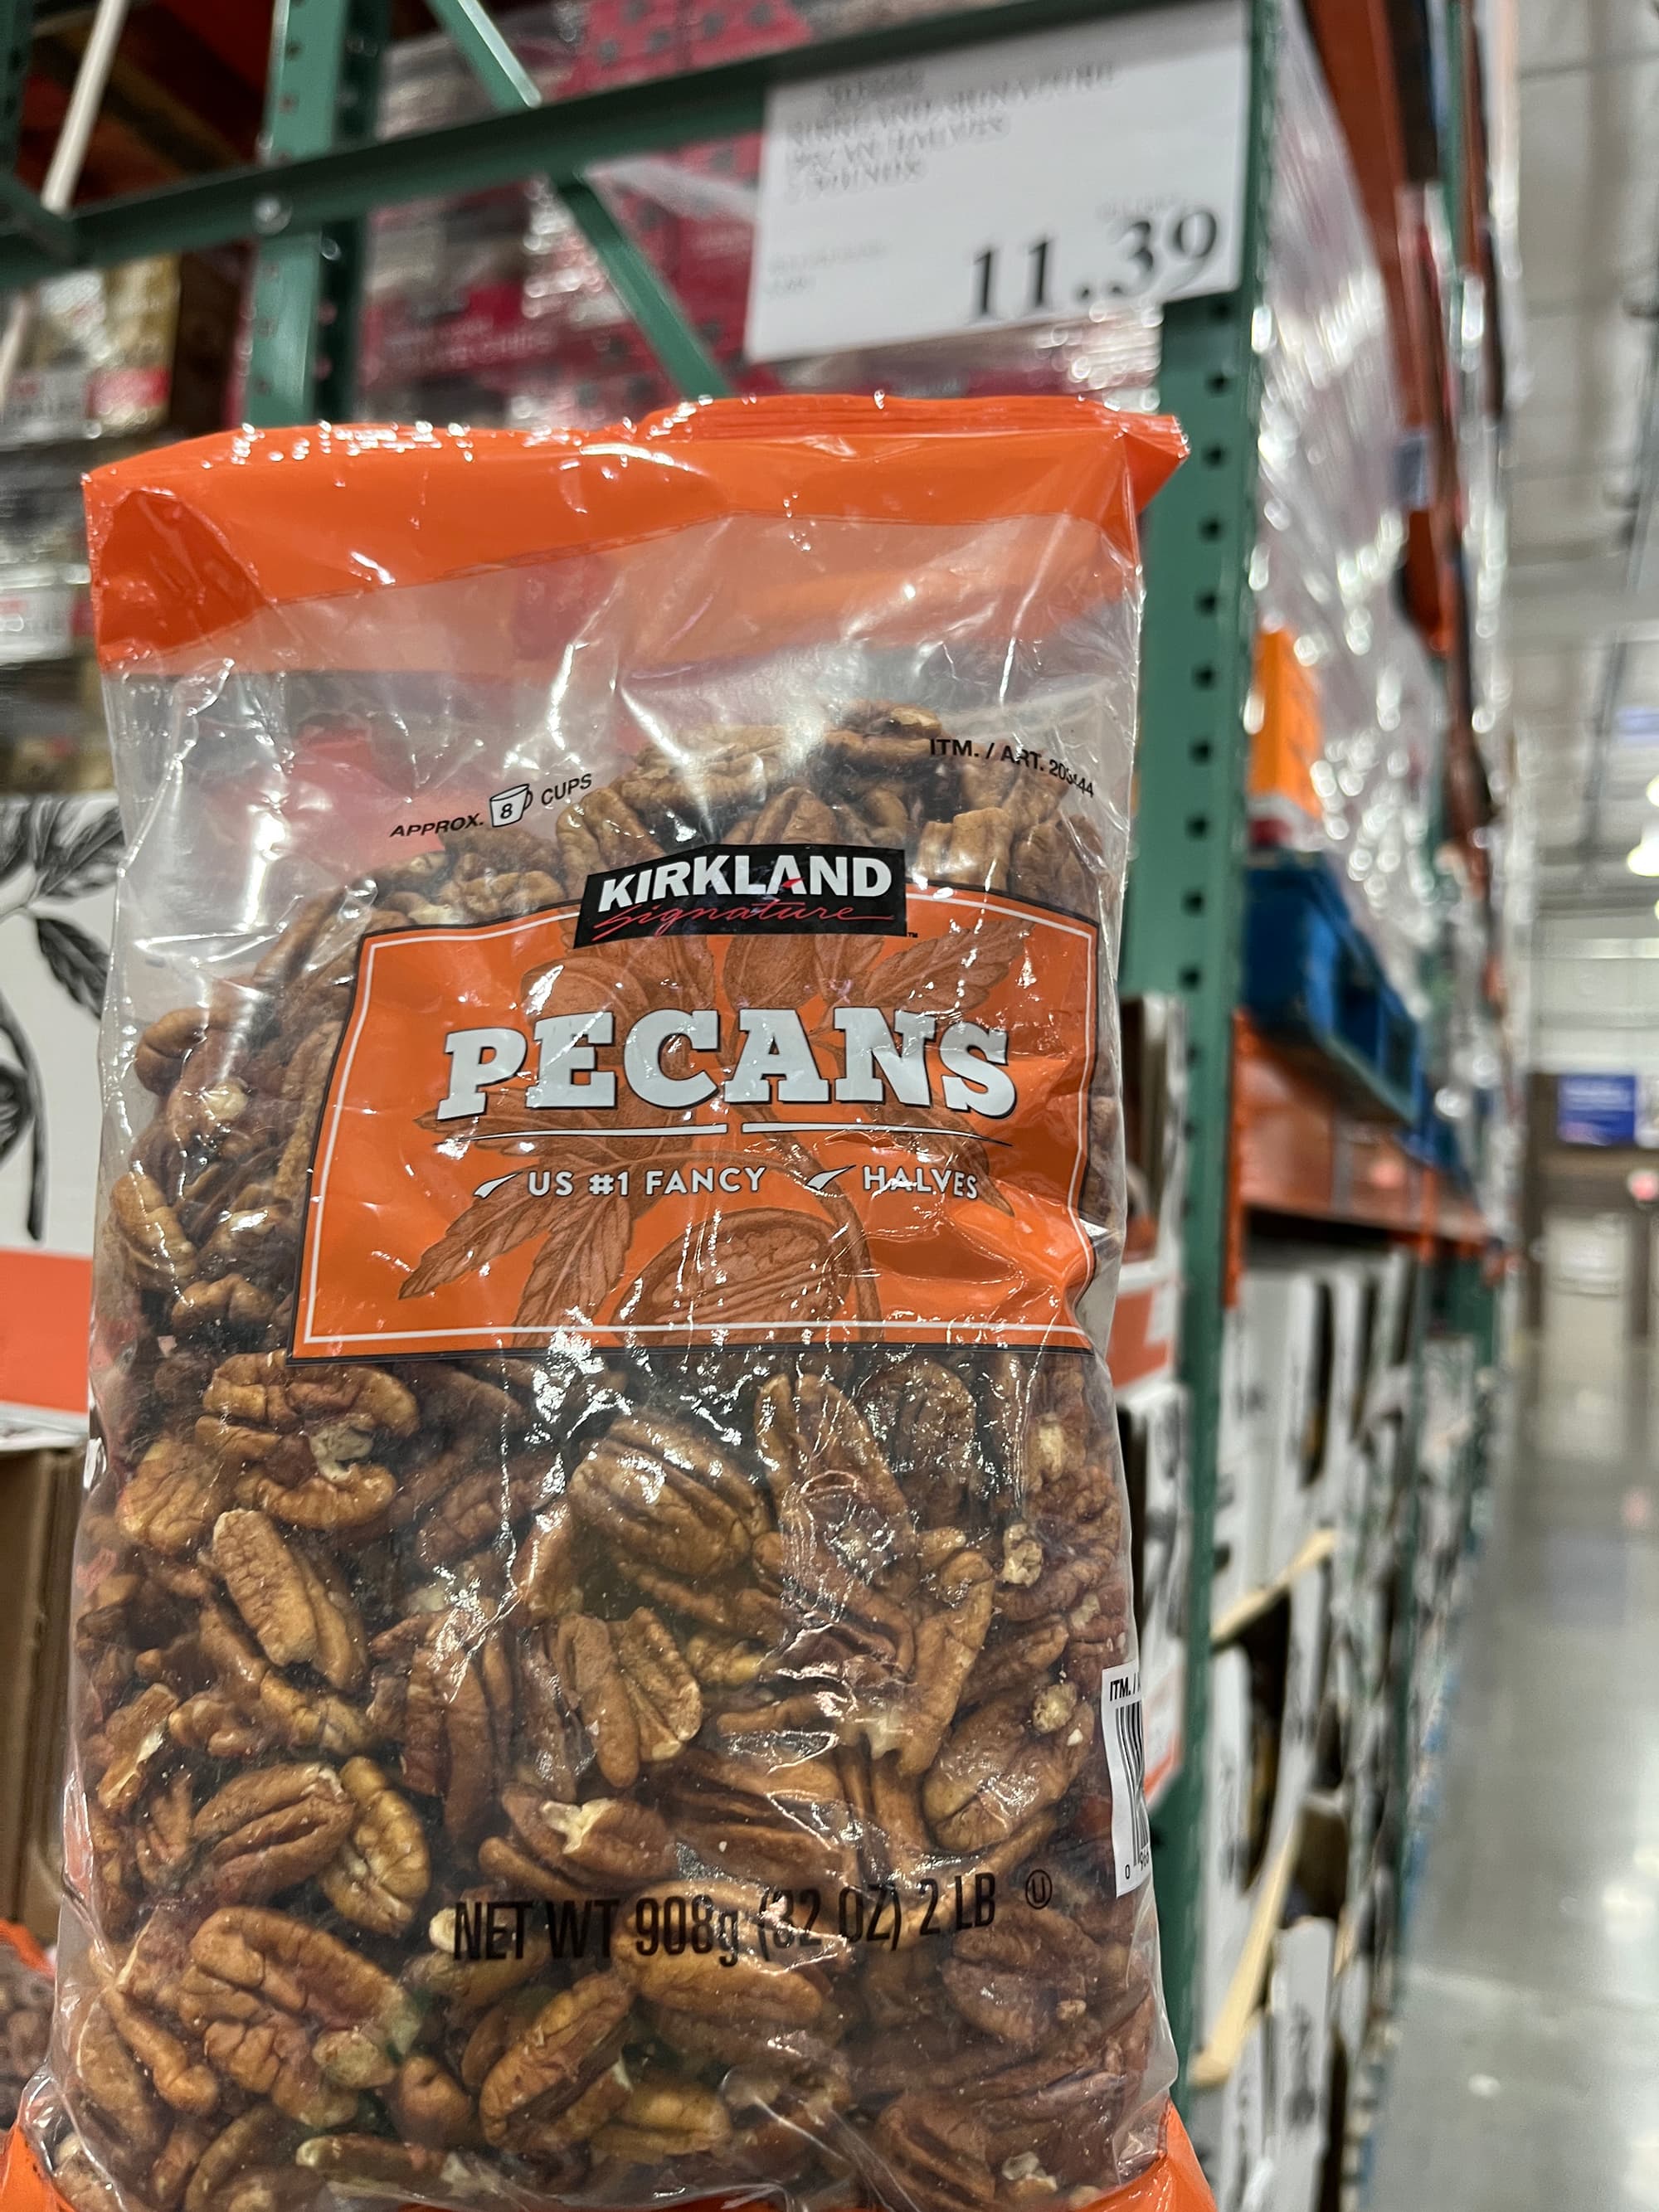 Best Costco Products: Kirkland Brand Products That Are Worth